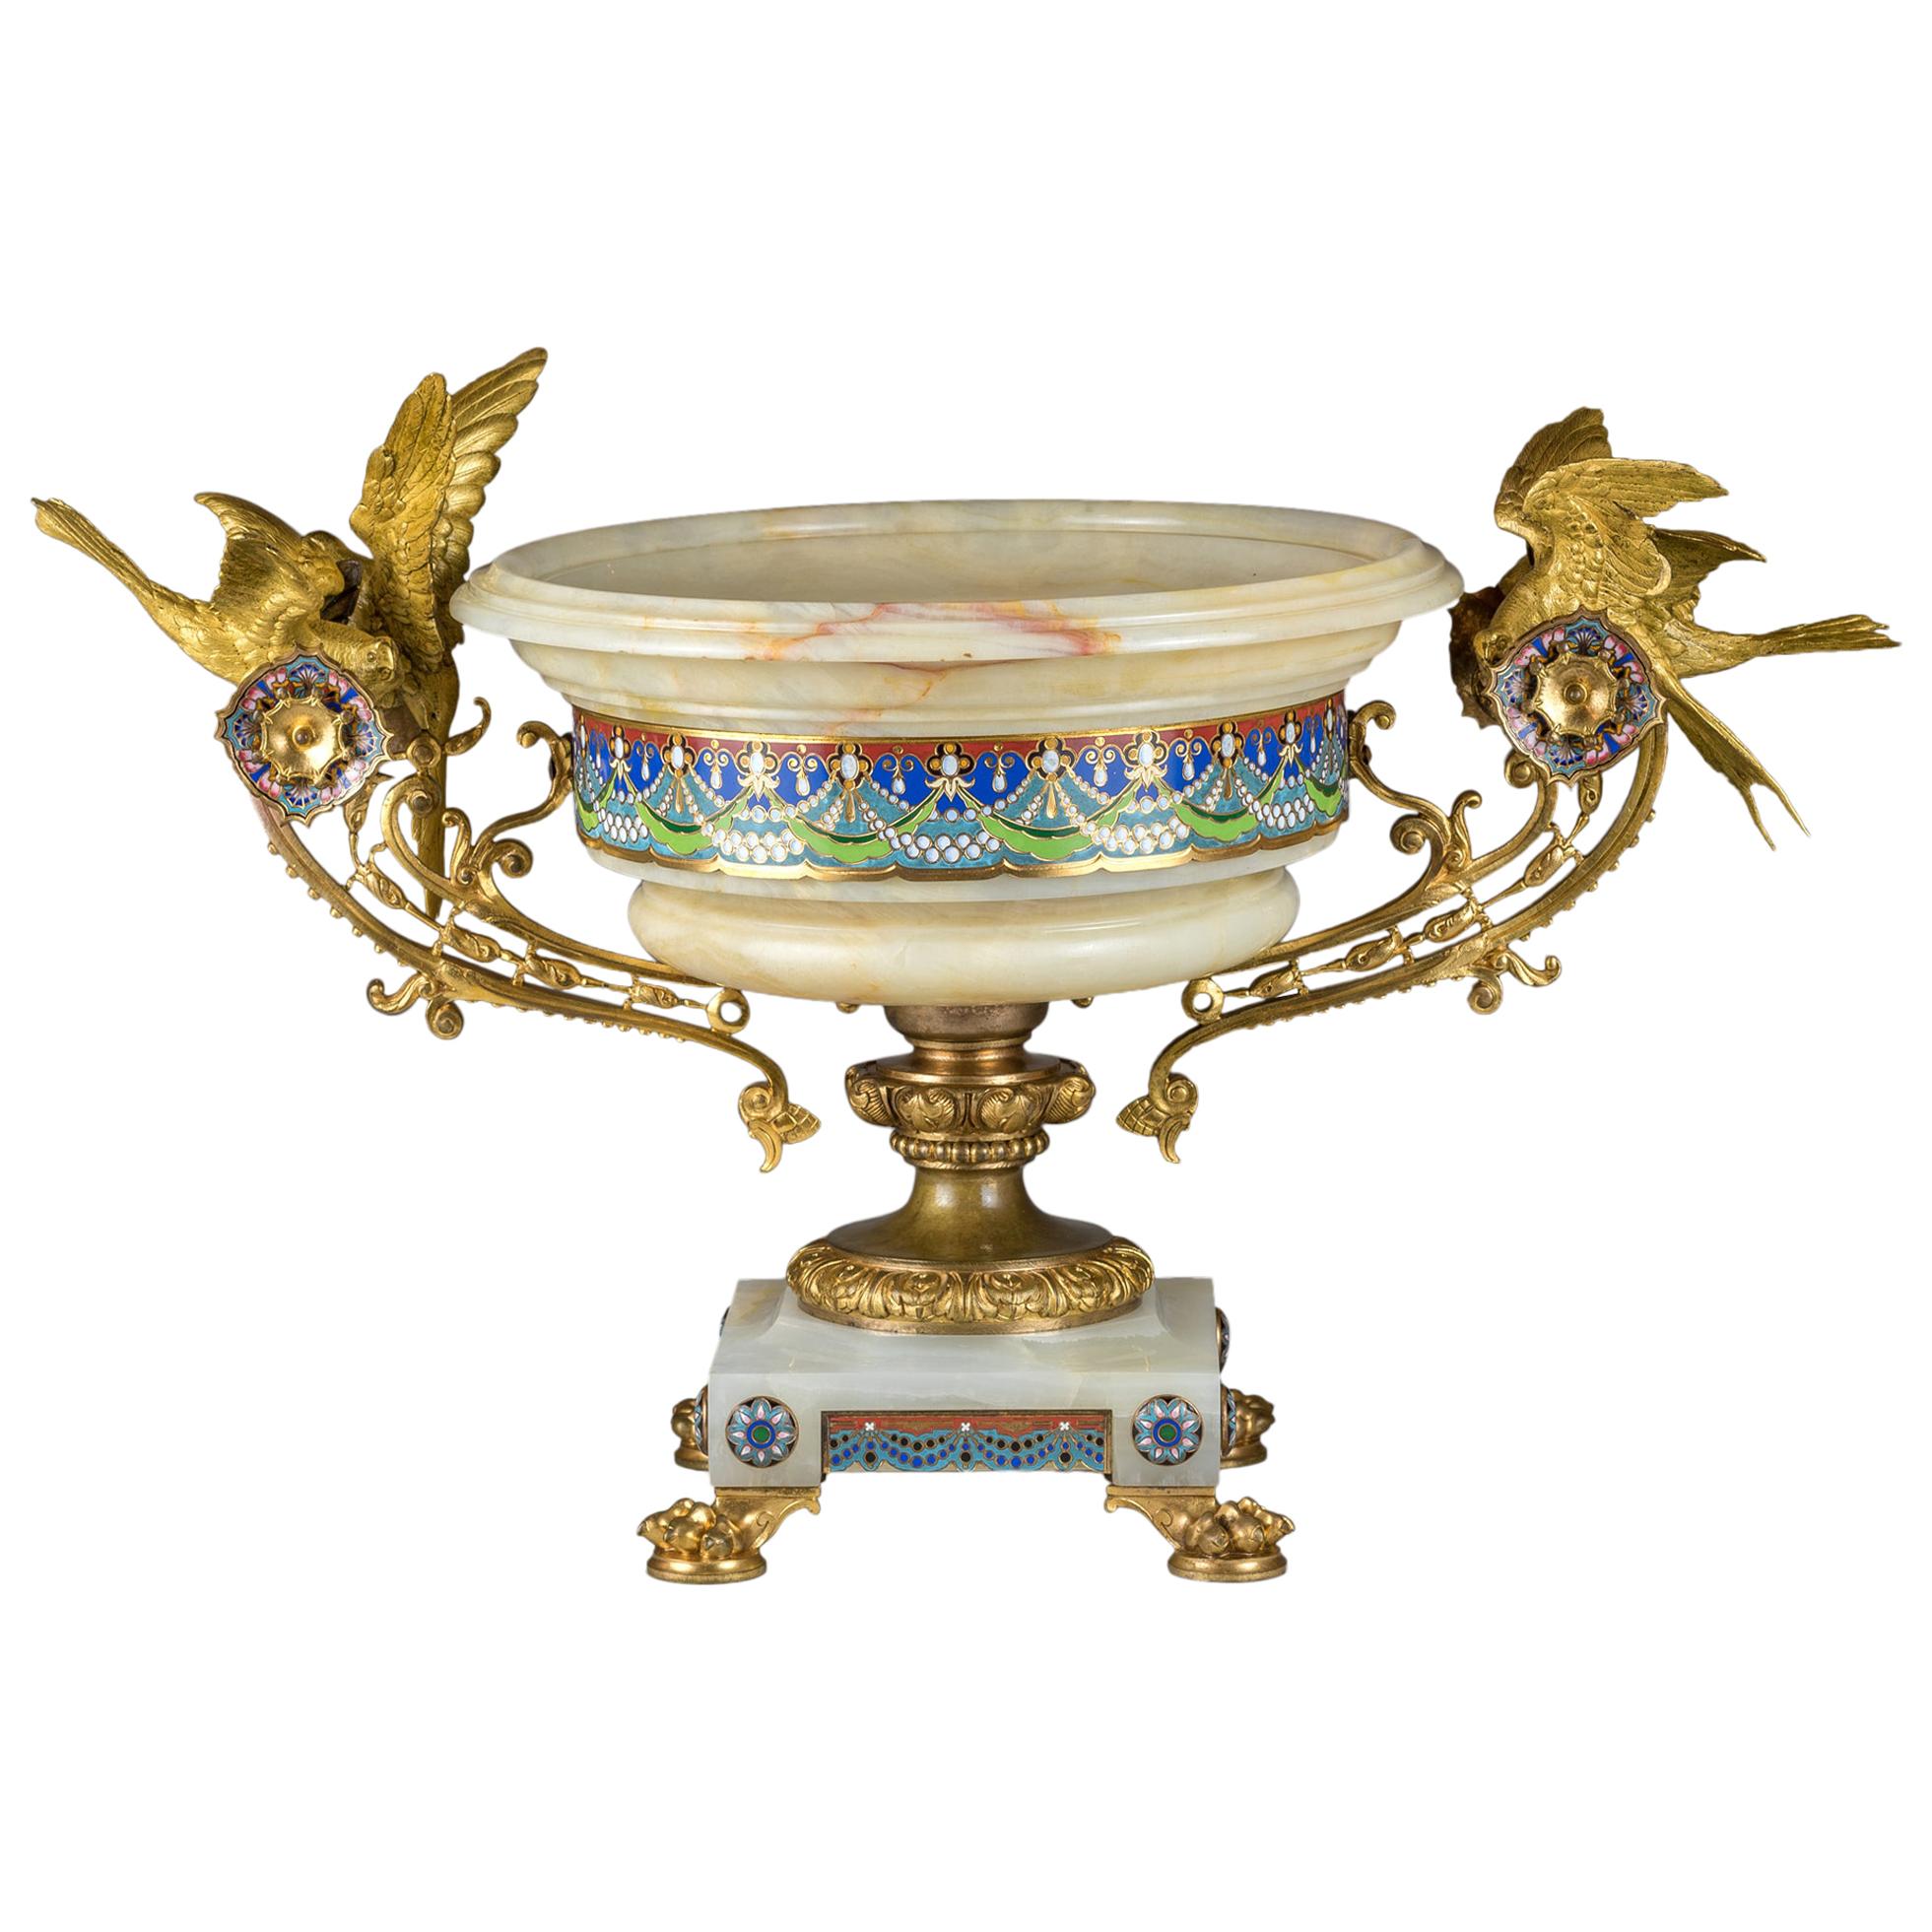 19th Century Large Gilt-Bronze Mounted Champlevé Enamel and Onyx Centrepiece